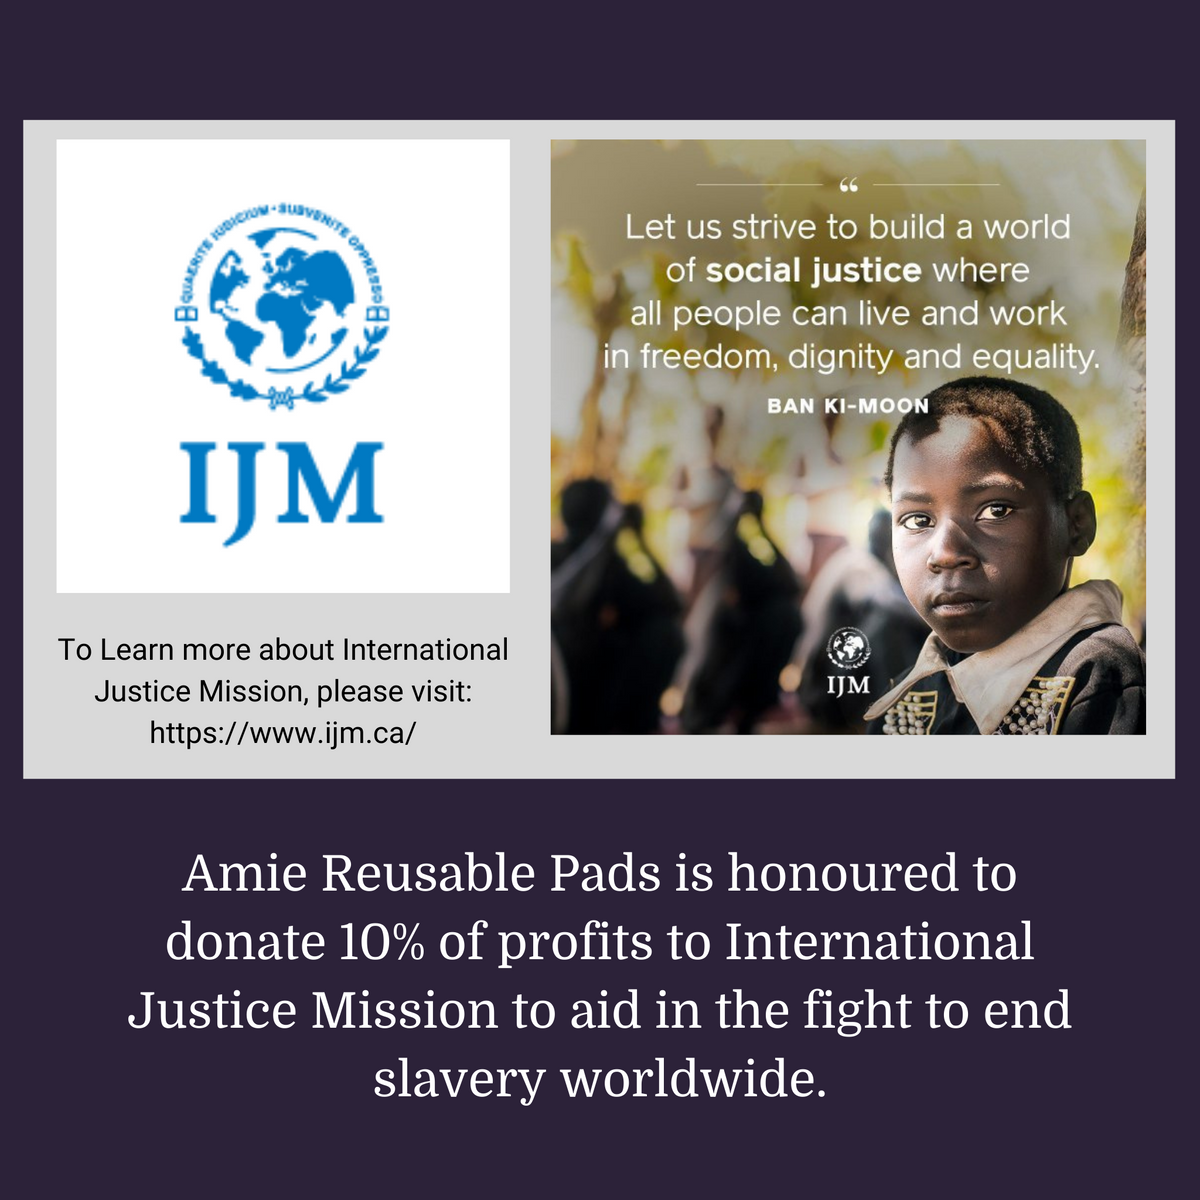 graphic showing amie reusable pads donates 10% of all profits to international justice mission